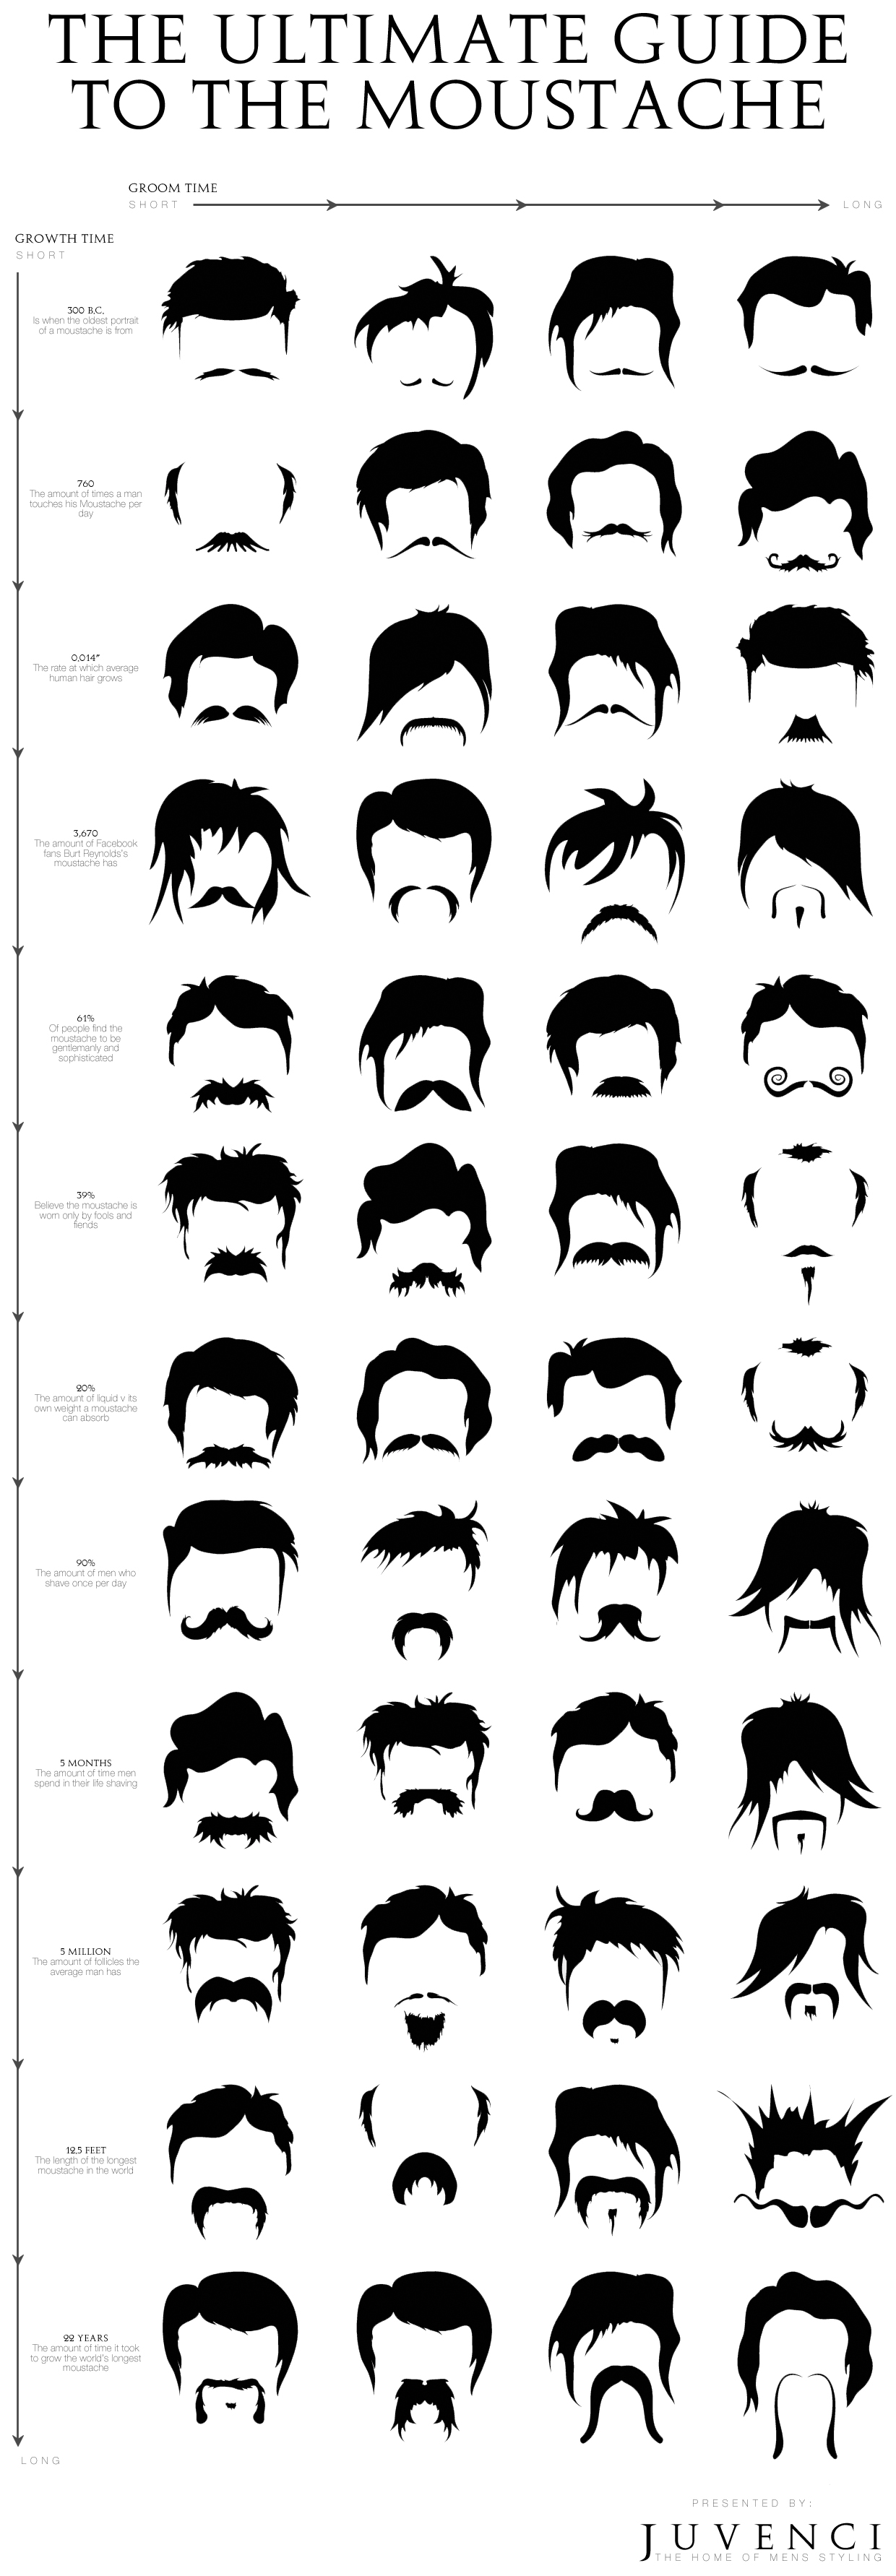 The ultimate guide to the moustache